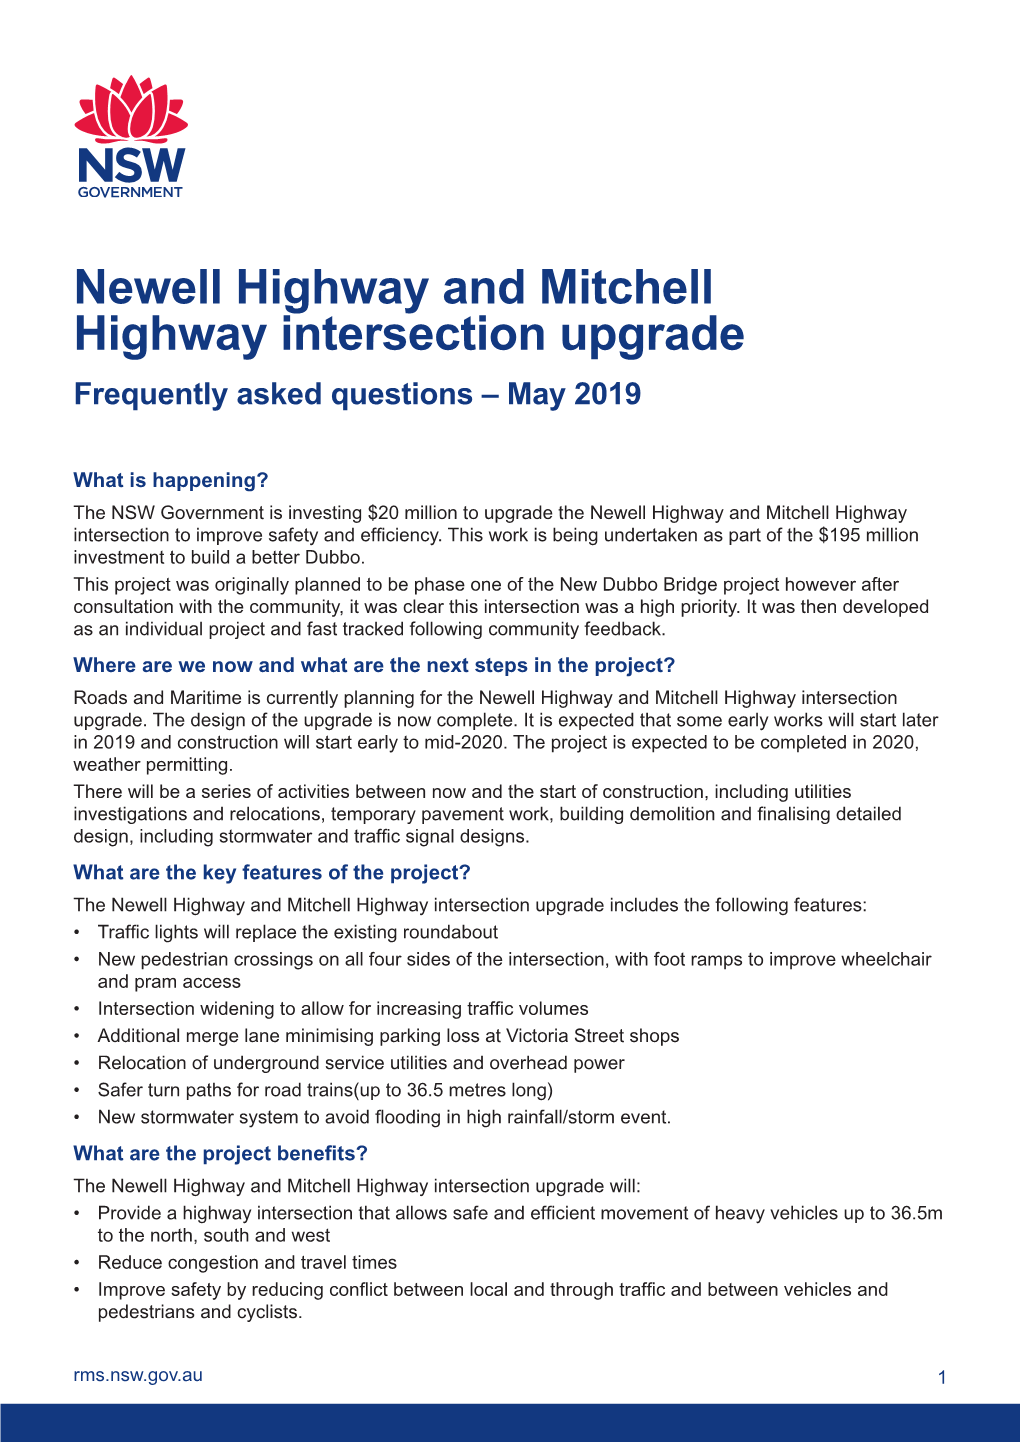 Newell Highway and Mitchell Highway Intersection Upgrade Frequently Asked Questions – May 2019